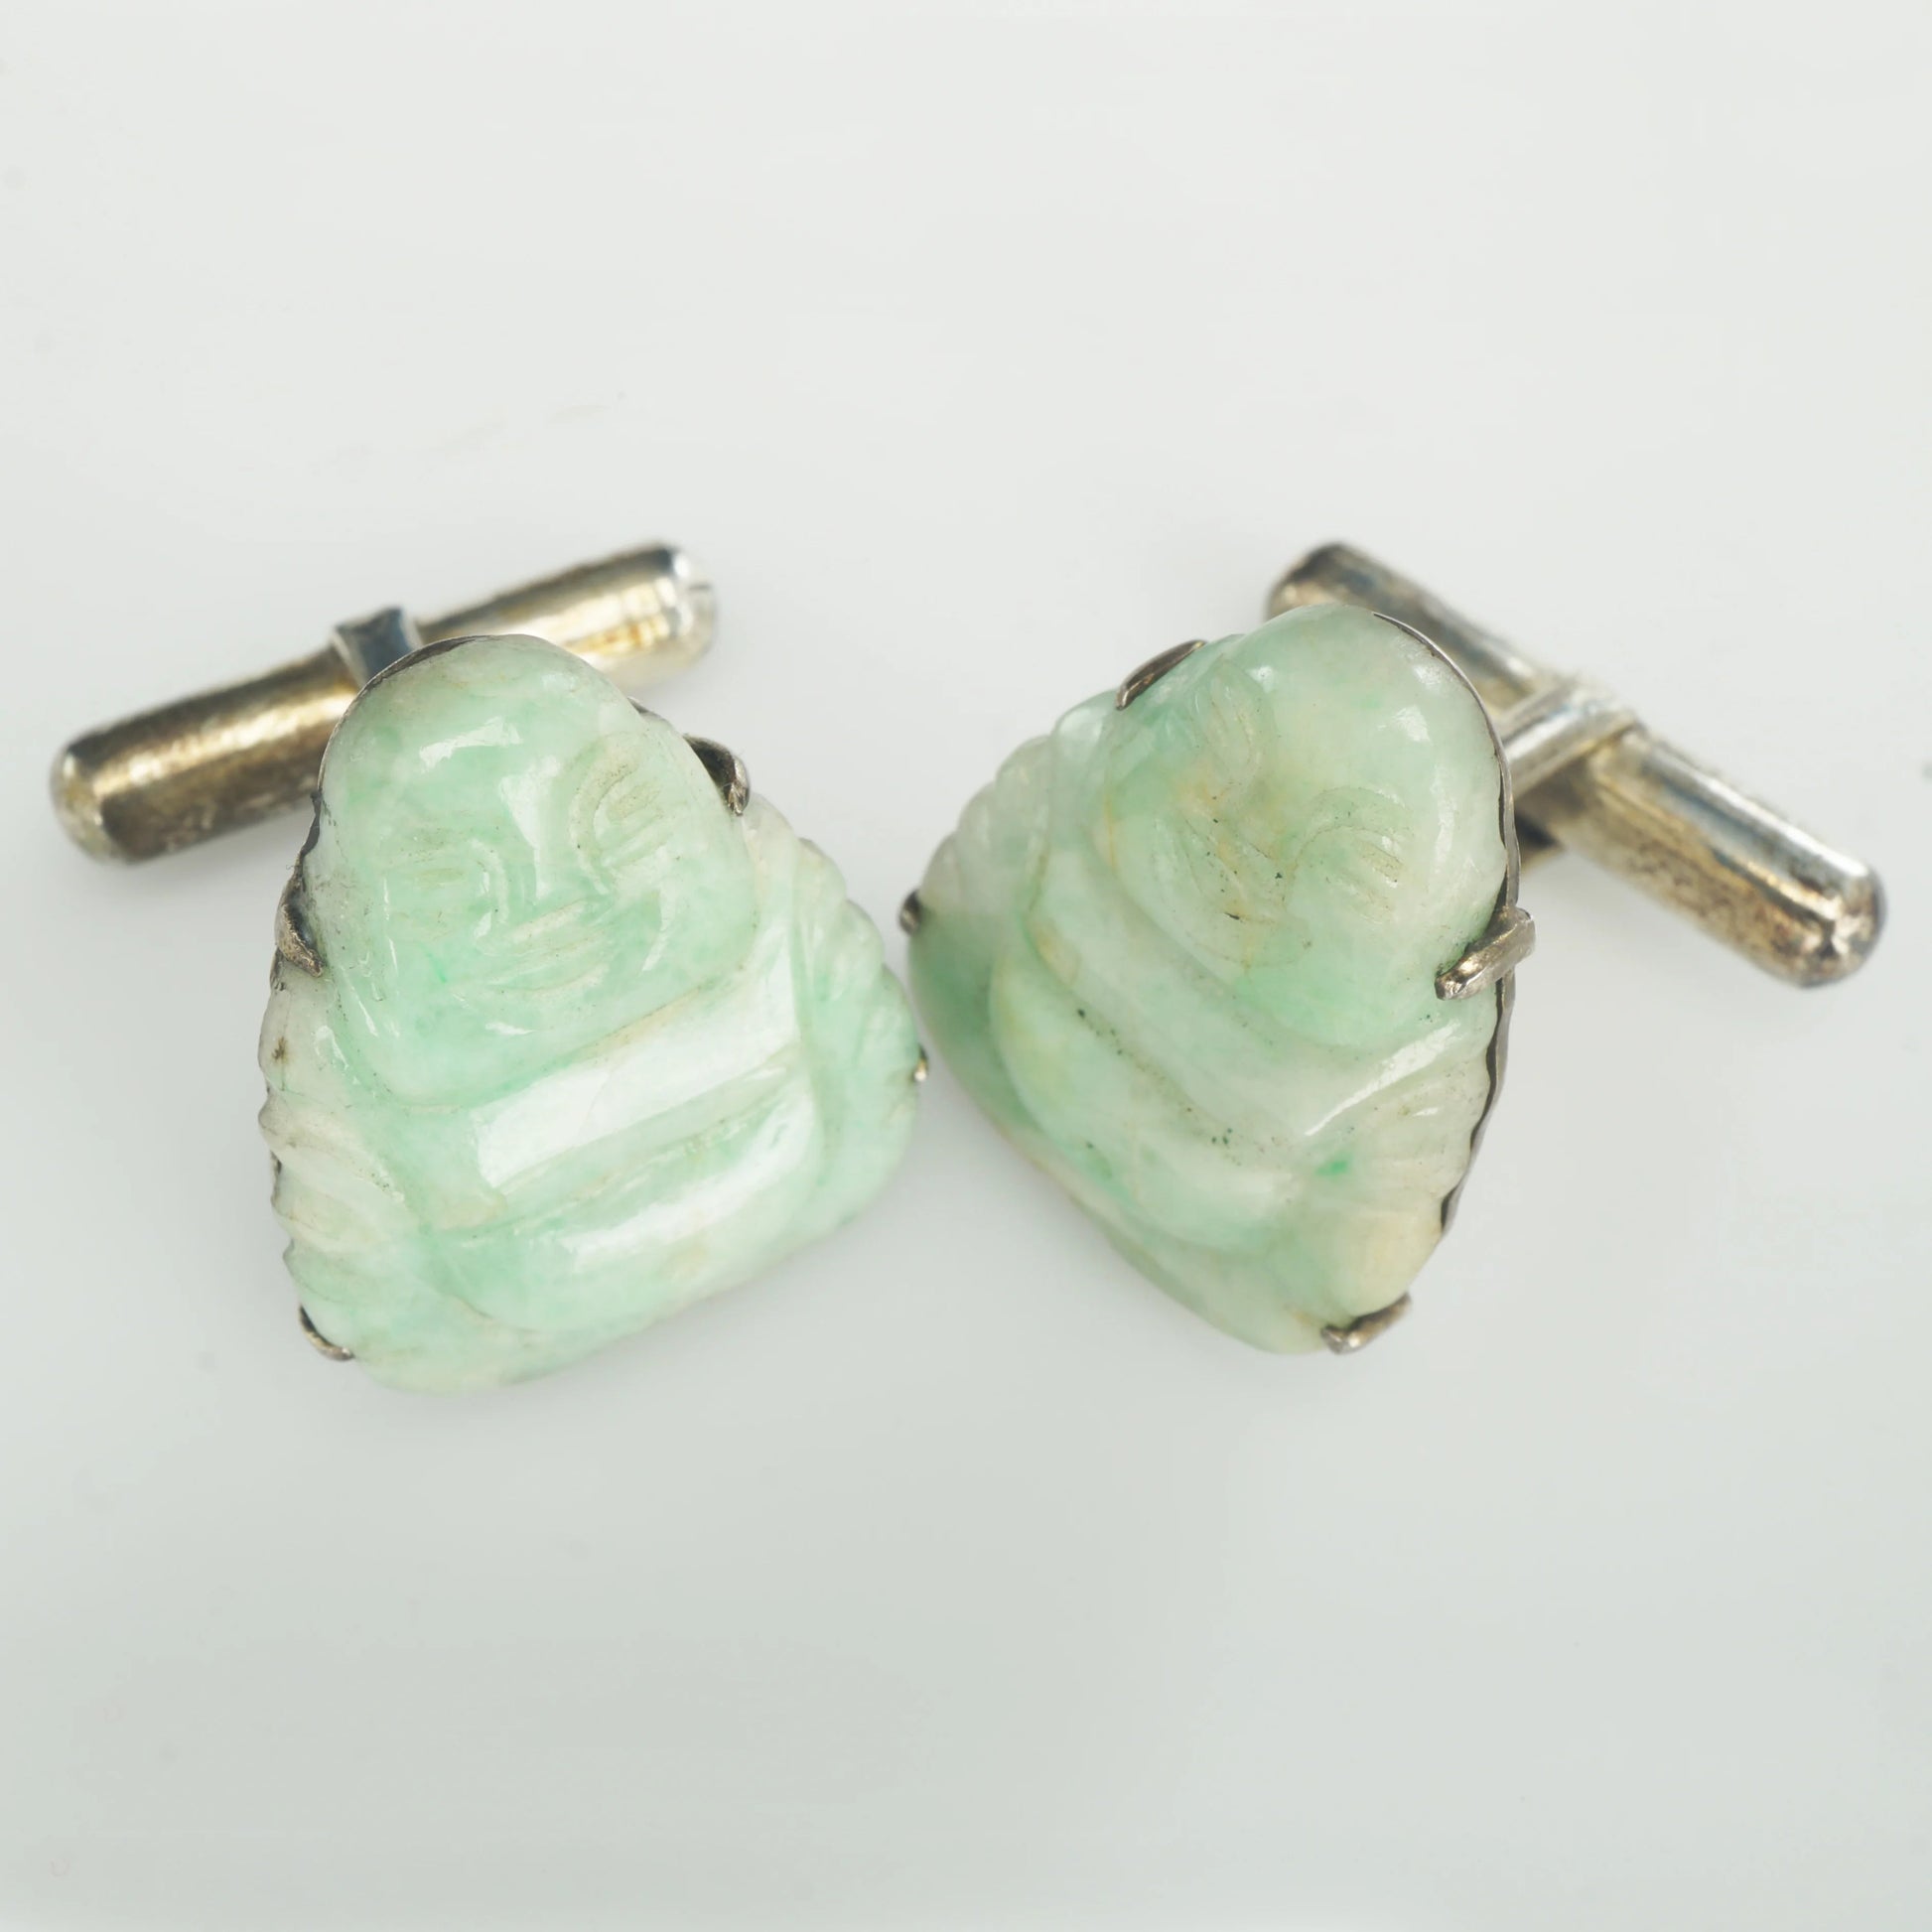 Vintage Chinese Carved Jadeite Happy Buddha Cufflinks - Bear and Raven Antiques